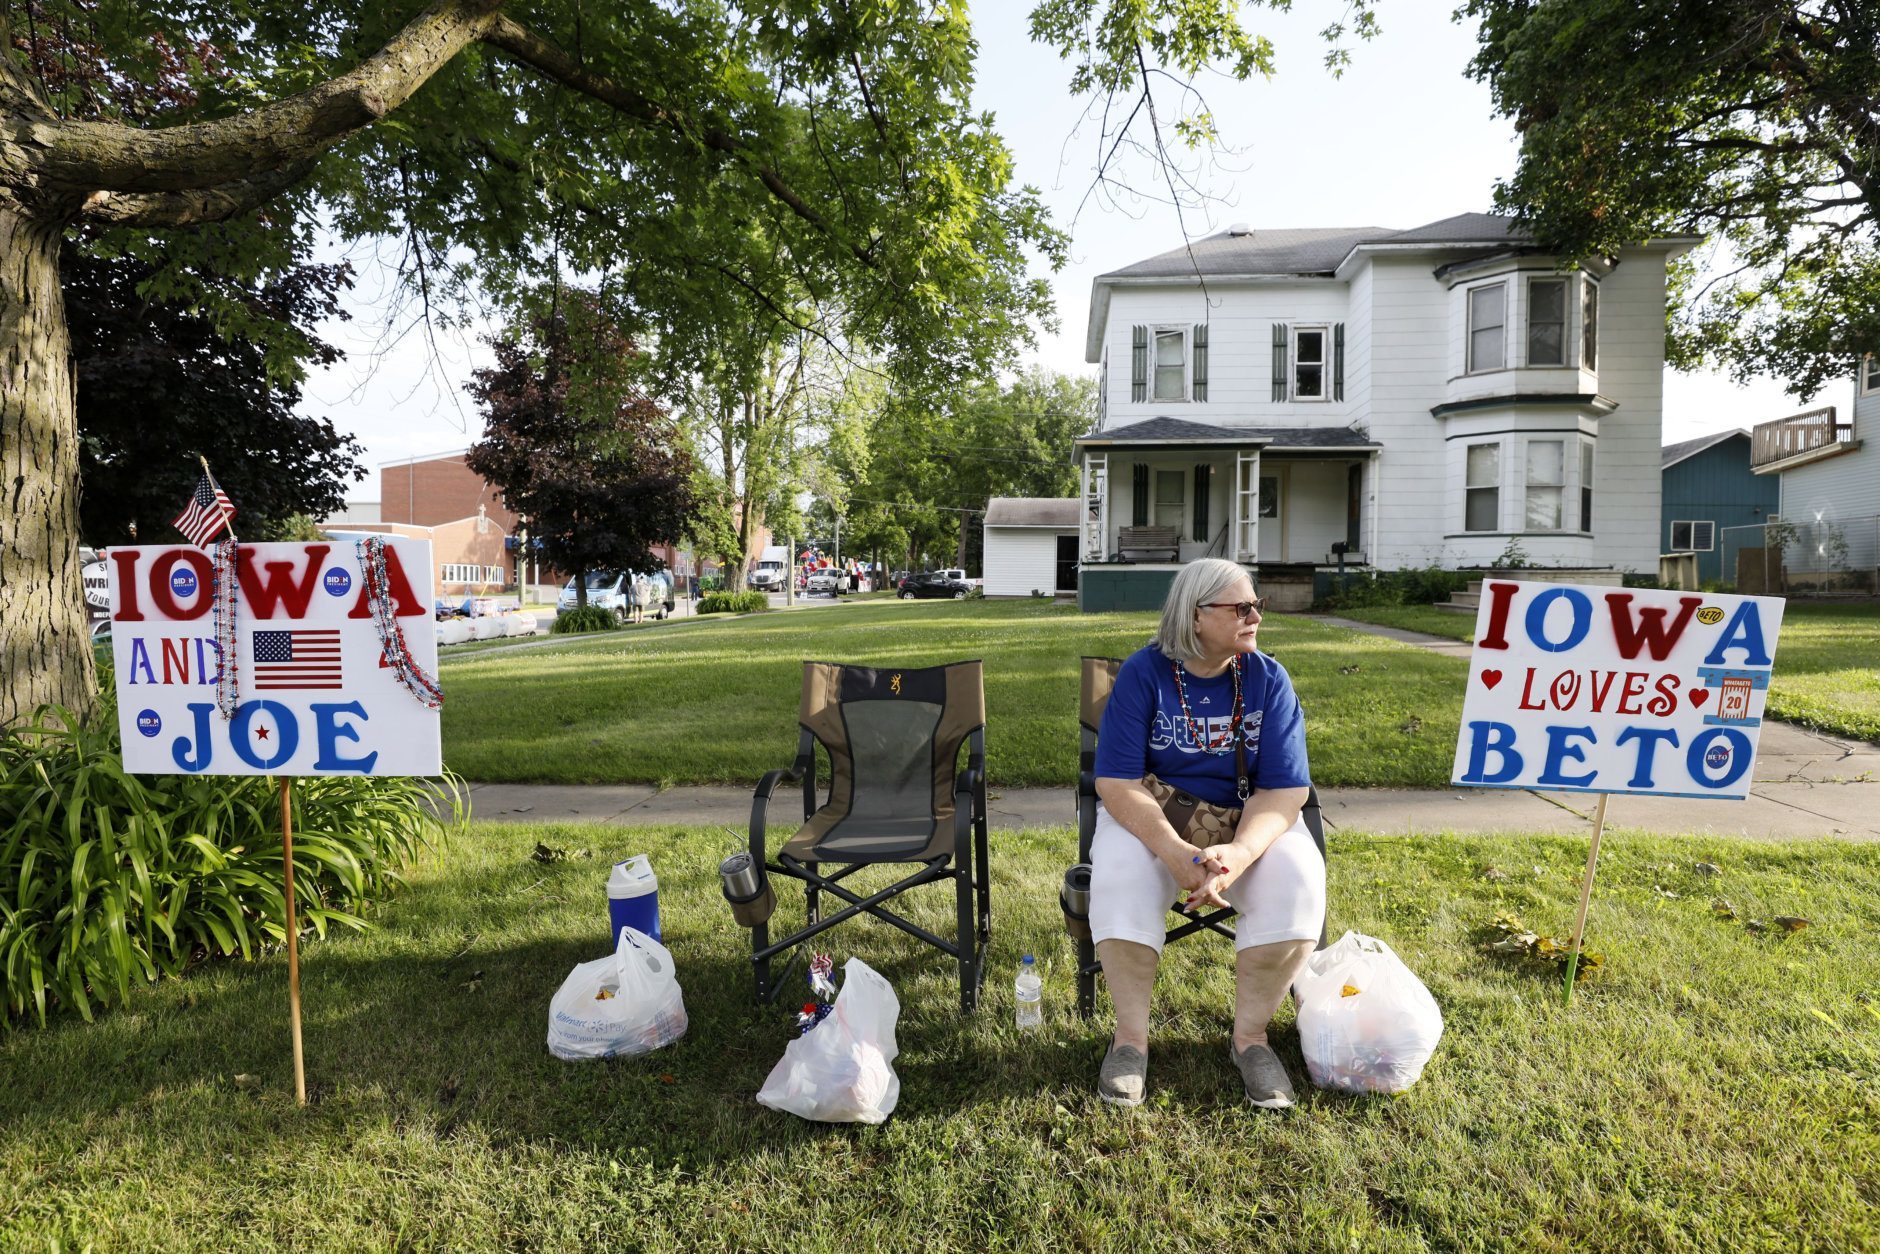 Marva Reece, of Winthrop, Iowa, waits for Democratic presidential candidates Joe Biden and Beto O'Rourke to arrive at the Independence Fourth of July parade, Thursday, July 4, 2019, in Independence, Iowa. (AP Photo/Charlie Neibergall)